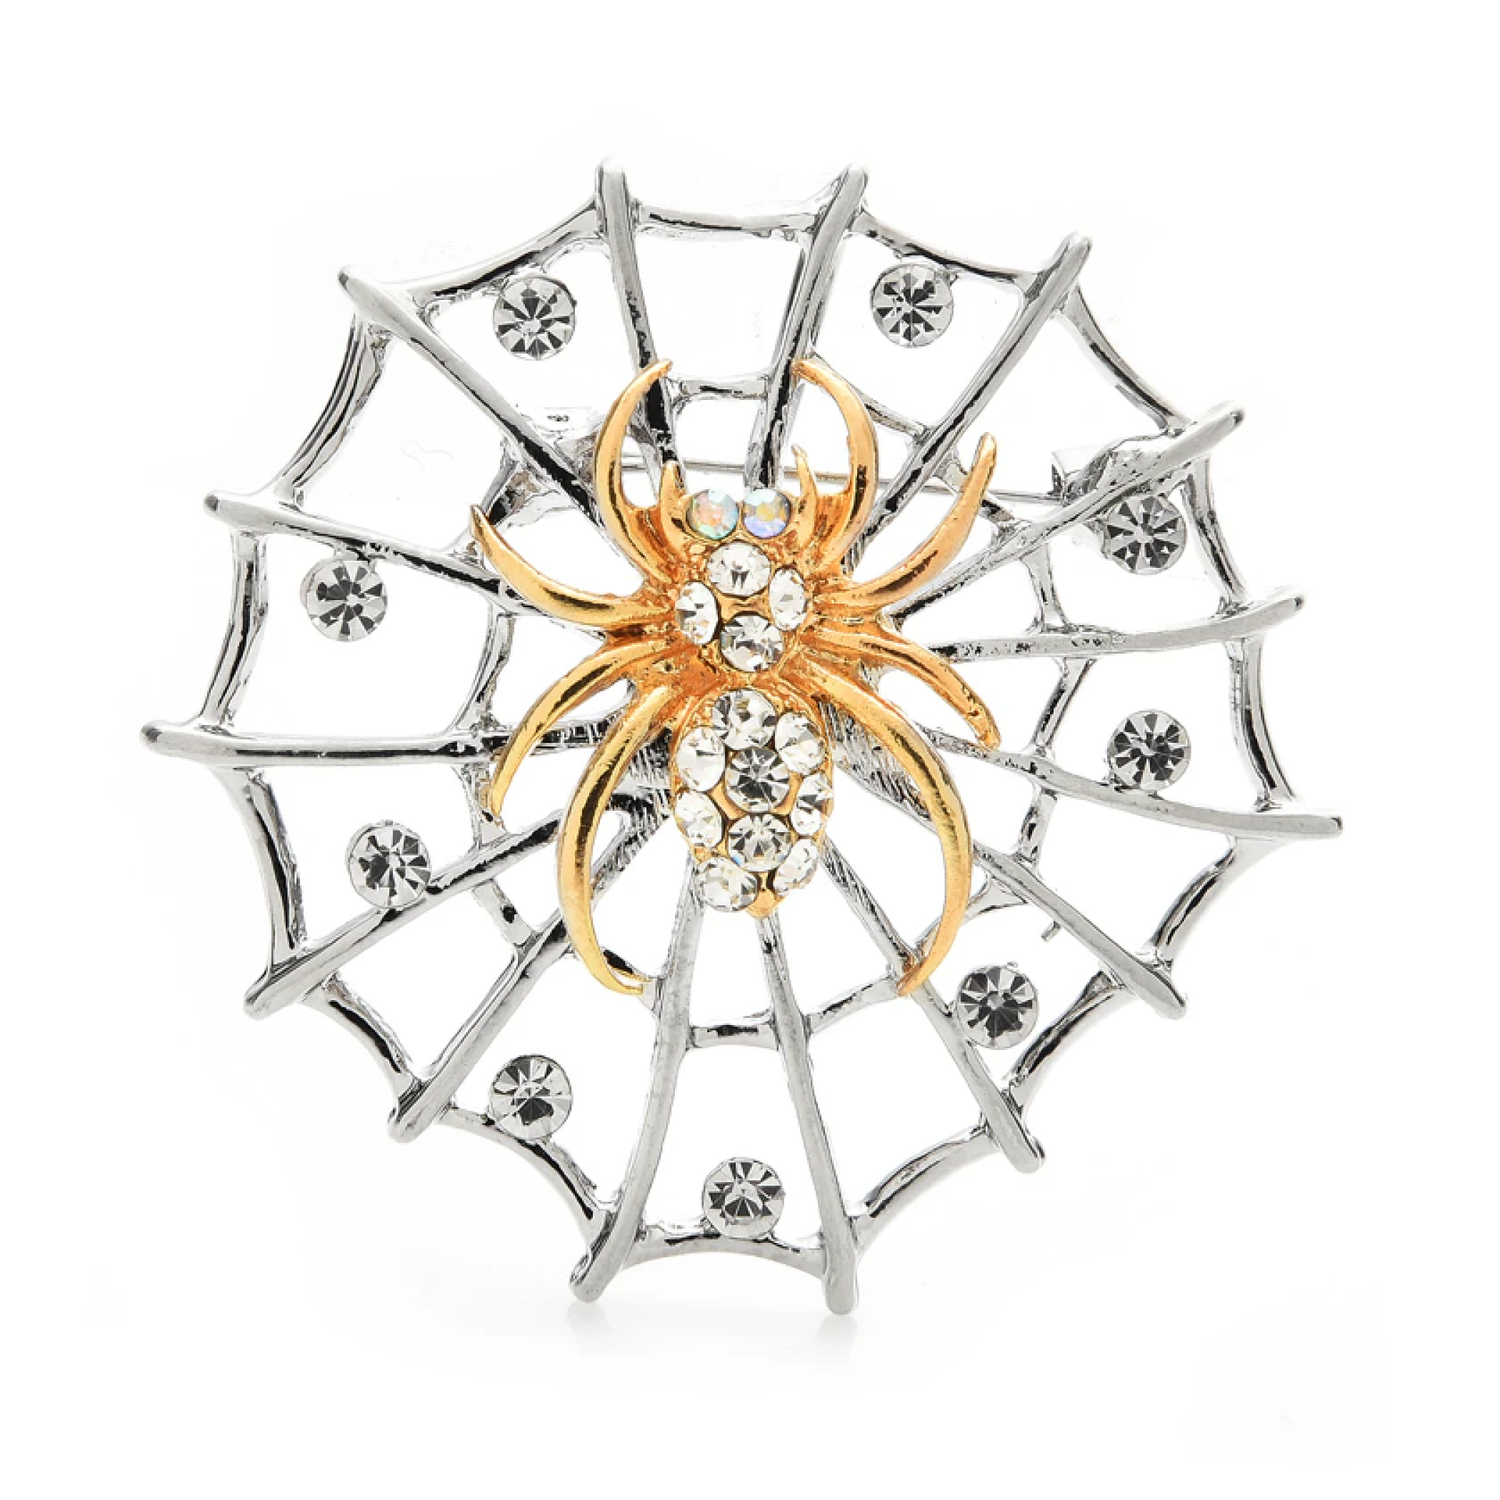 Silver Spider Web with Gold Spider Lapel Pin